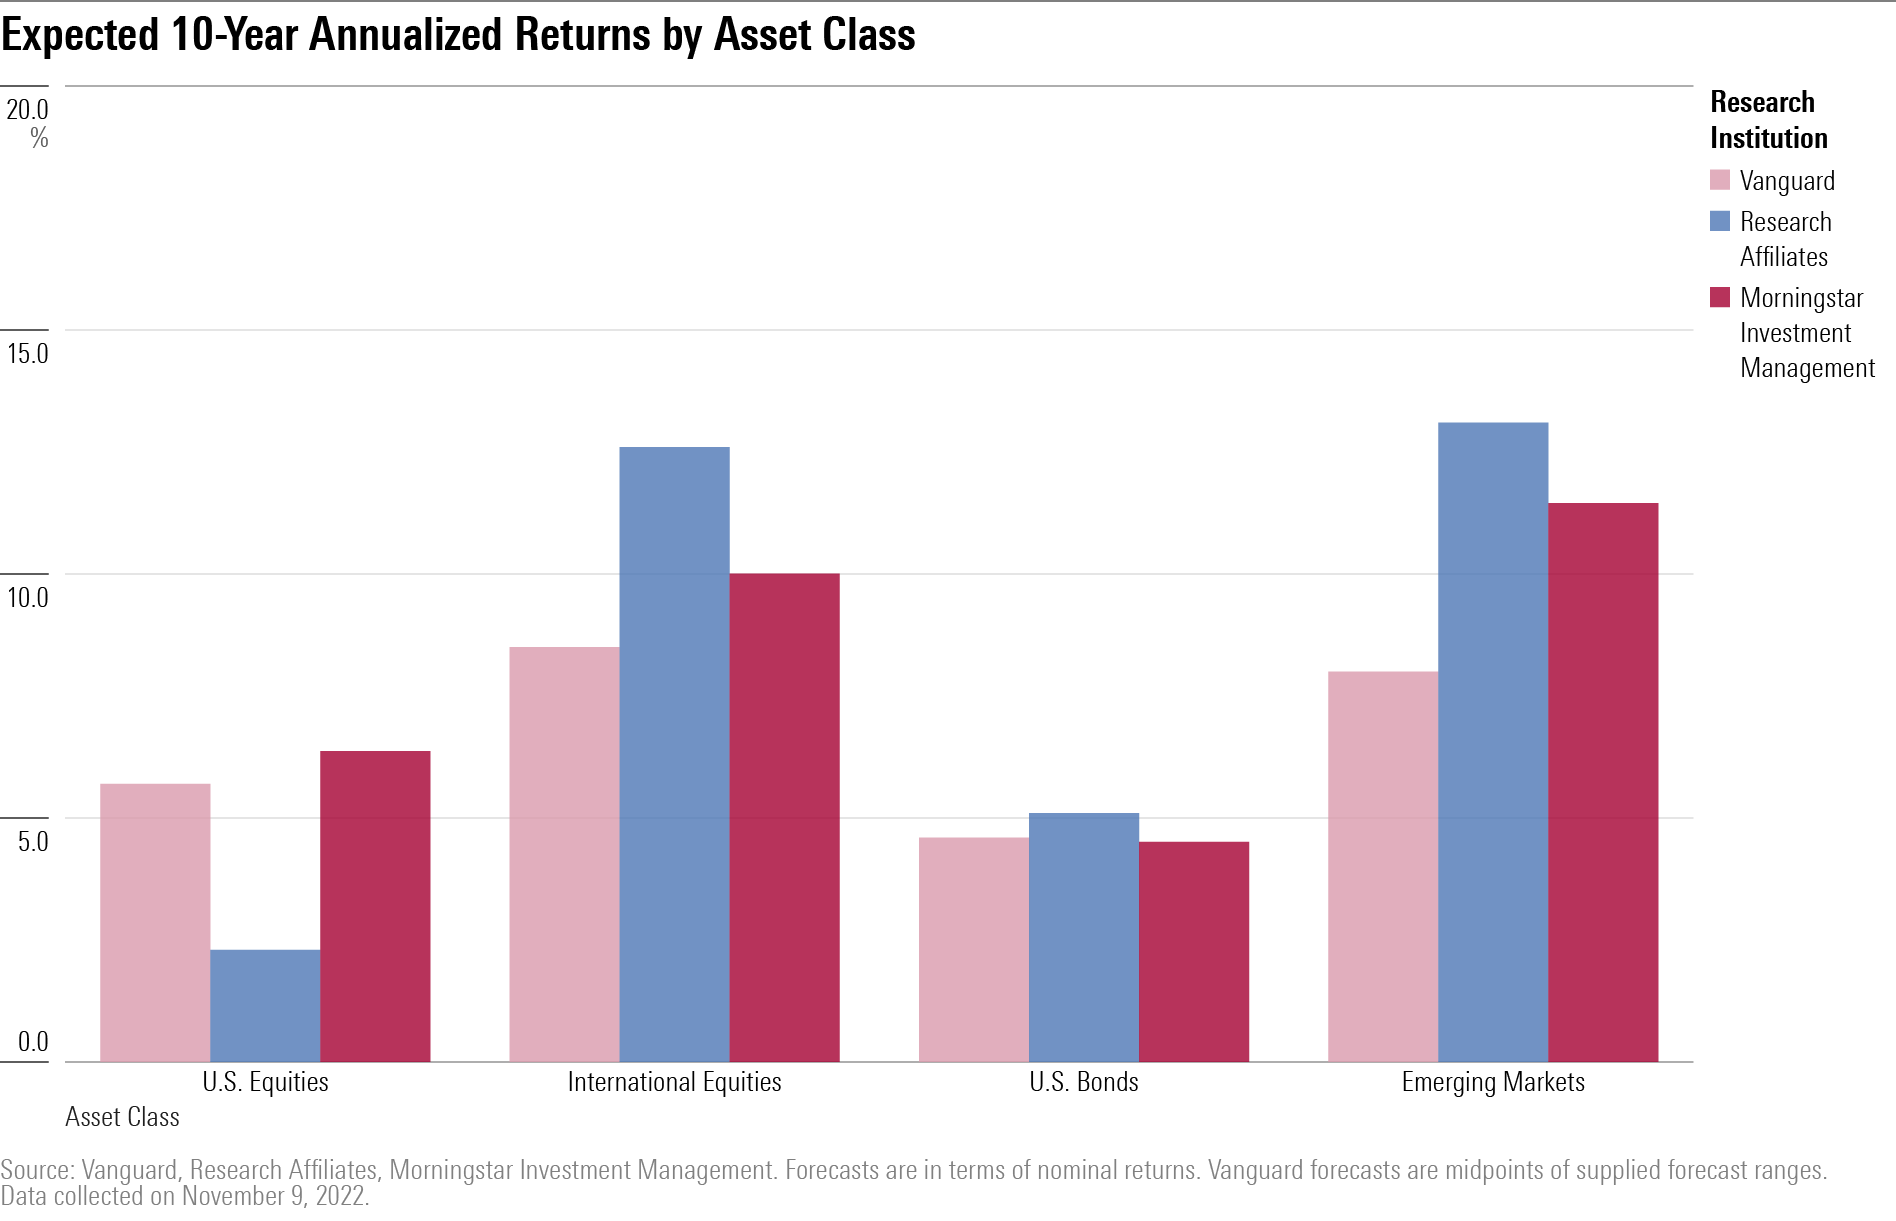 A grouped bar chart showing forecasts for annualized asset class returns over the next 10 yrs from Morningstar, Vanguard, and Research Affiliates.